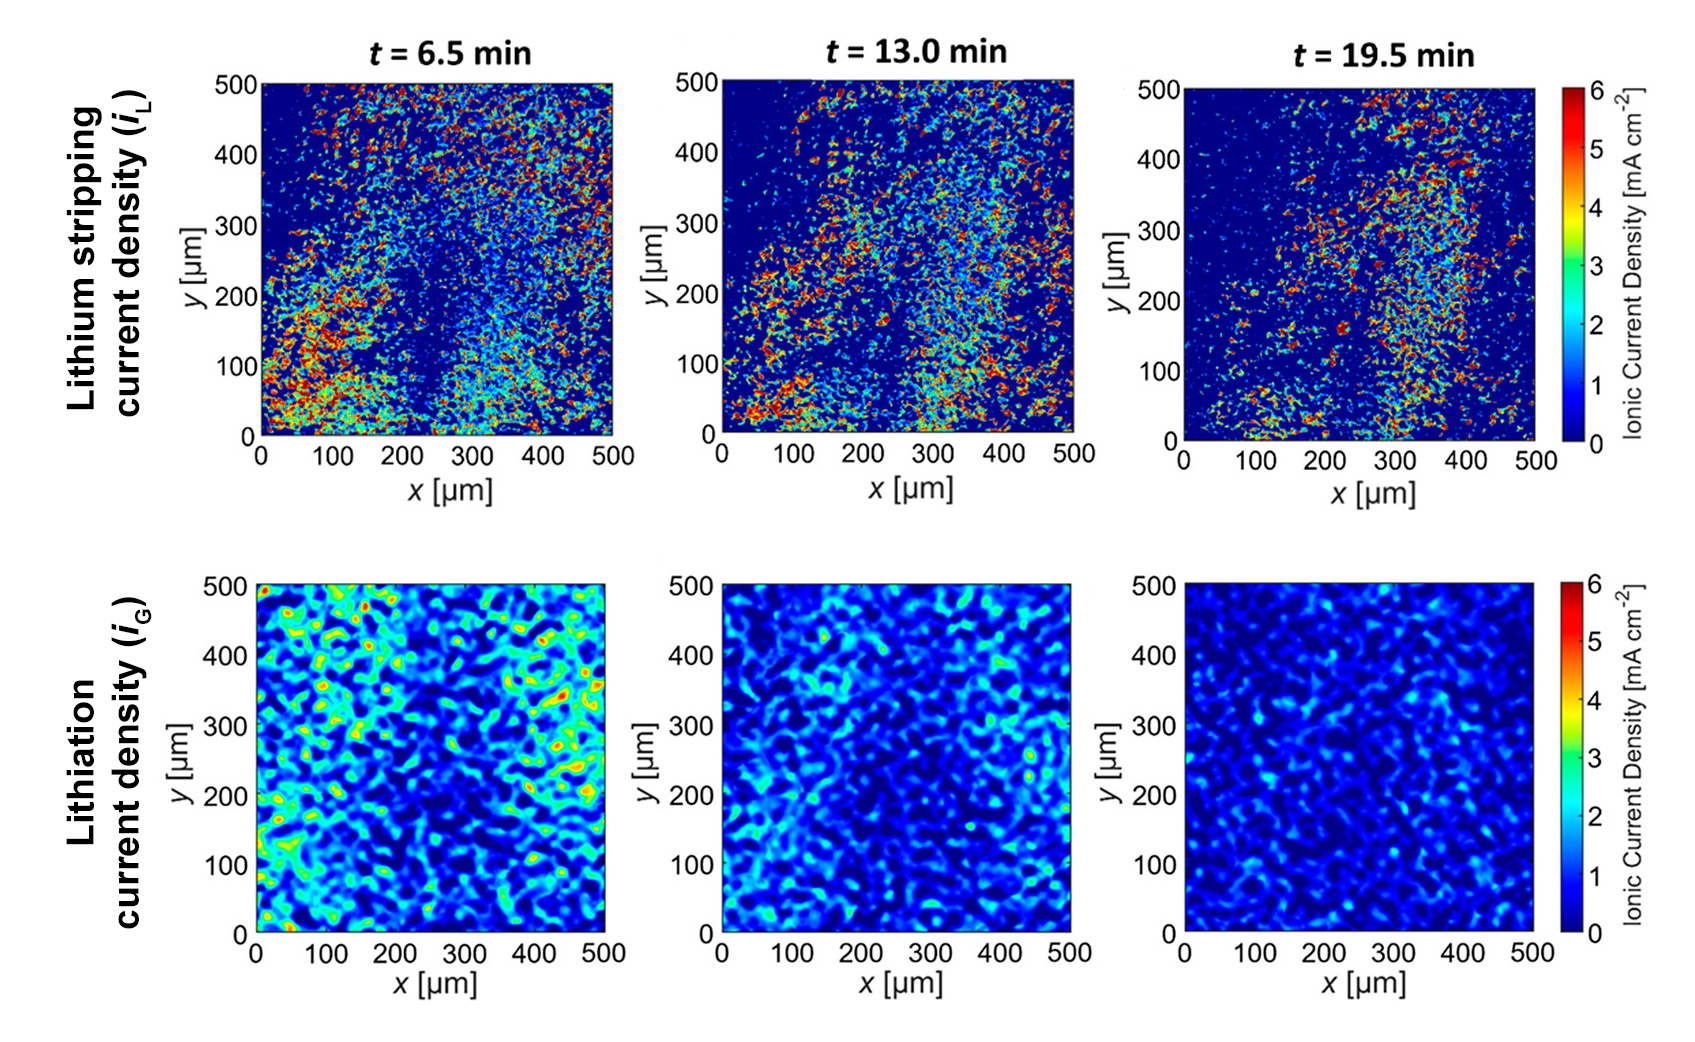 Six panels (two rows of three each) show spatially resolved ionic current densities (color speckles) obtained using tomographic data. The top row shows the data for the lithium stripping current density measured at three times following fast charging (t = 6.5, 13.0, and 19.5 minutes), and the bottom row shows the data for the lithiation current density at the same times. The top row shows greater range in values (the color scale includes more red).